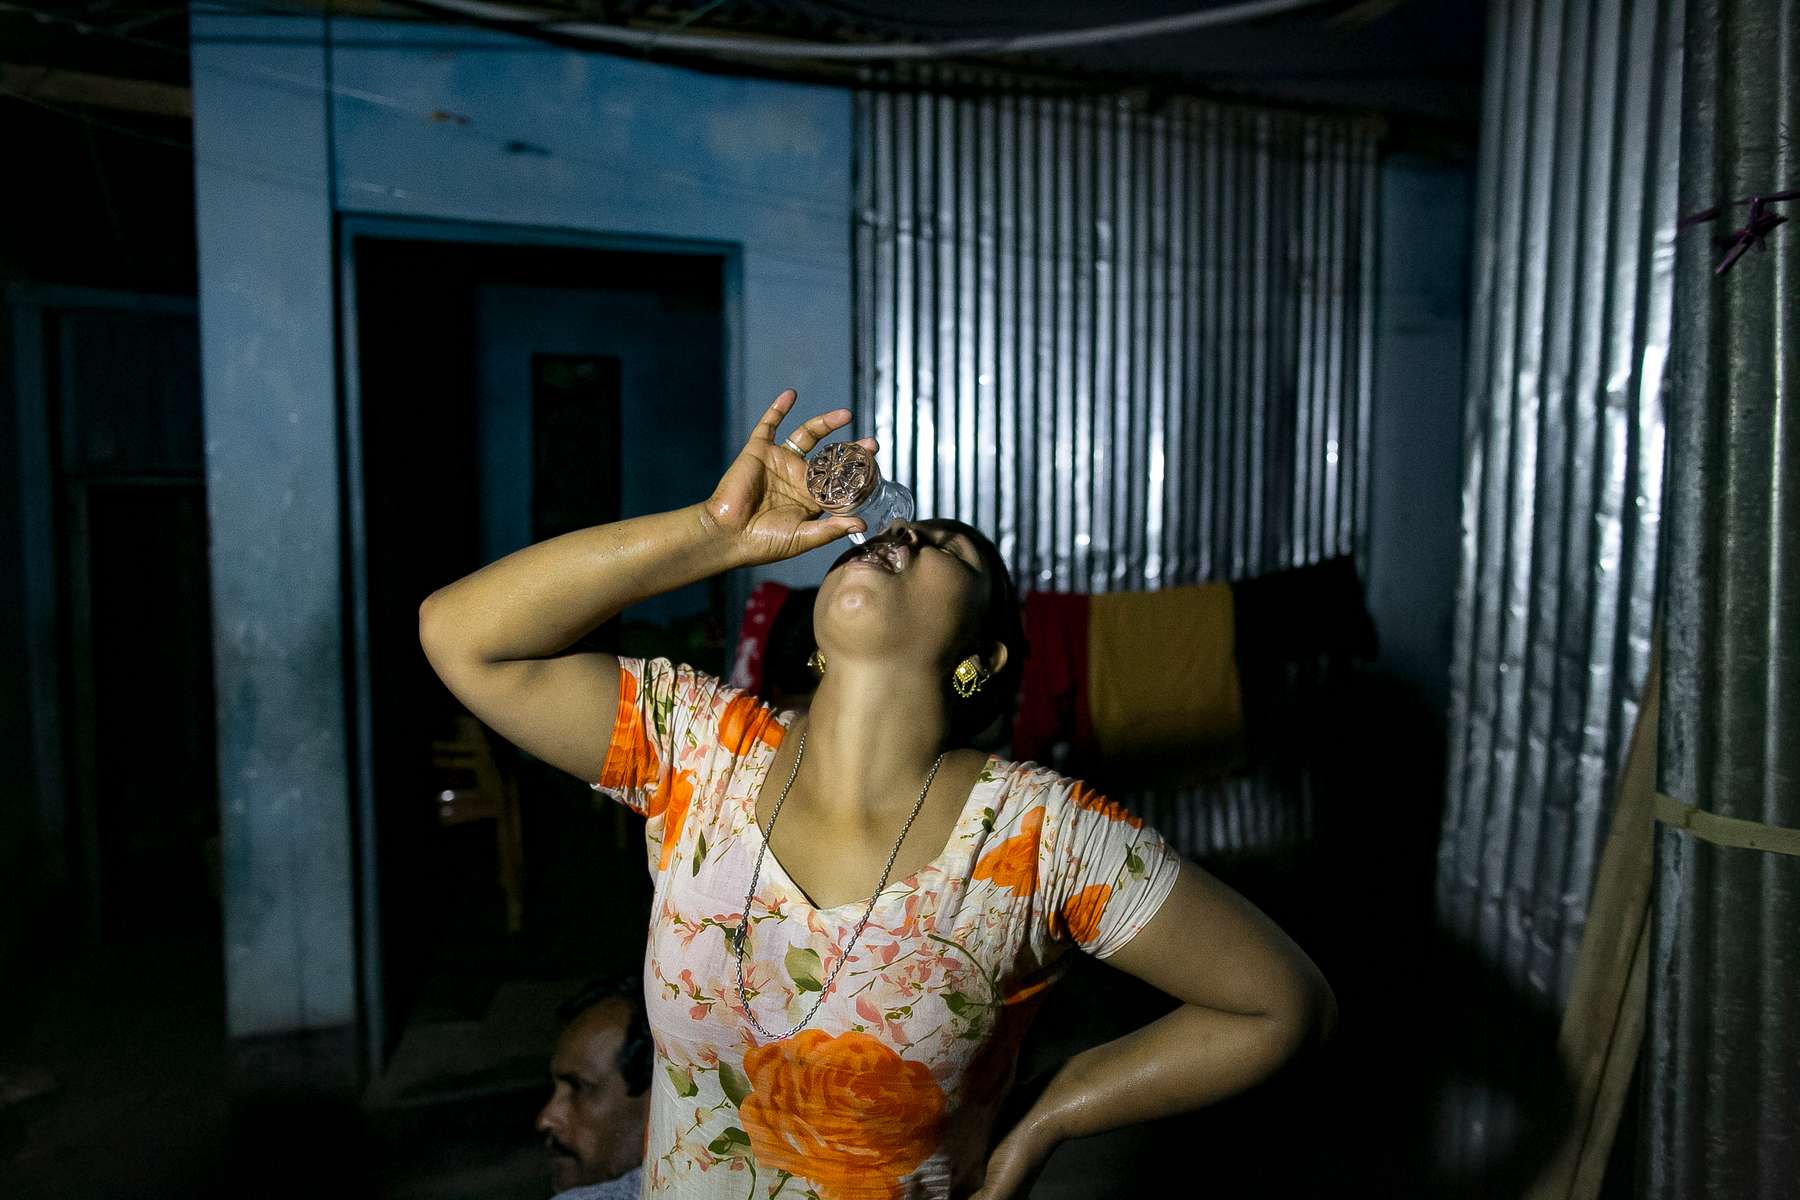 Sony drinks a shot of alochol in the brothel. Sony was married at 11 years old and trafficked to Daulatdia brothel when she was 13.‘I didn’t even know what sex was before I was married, but within a year of the ceremony, I’d been raped so many times I’d lost count. My mother-in-law would take my clothes off my body, then send me in to see her son. It didn’t matter how loudly I screamed. Nobody ever came to help me. But even when I stopped fighting back, it wasn’t enough to please my husband, and when my father admitted he couldn’t pay my dowry, I was sent back to my family. But the shame was too much – so they sent me away too. When a trafficker found me at a train station, she took me to the brothel where pimps beat me with hammers and vegetable peelers until I stopped trying to run away.None of my friends were married at my age, and none of them have had lives like mine. My father found me a husband because he thought village life was too dangerous for young daughters – there was so much harassment, and he feared that I might be attacked if I didn’t have a husband. But having a husband ruined my life. All I ever wanted was to go to college and get a good job, but that will never happen now. My sister is 21 and works for an NGO while studying for her Masters degree – she’s leading the life I always dreamed of. So I’m paying her school fees. Whenever I have a customer, I think, ‘it might be too late for me, but it’s not too late to help her.’